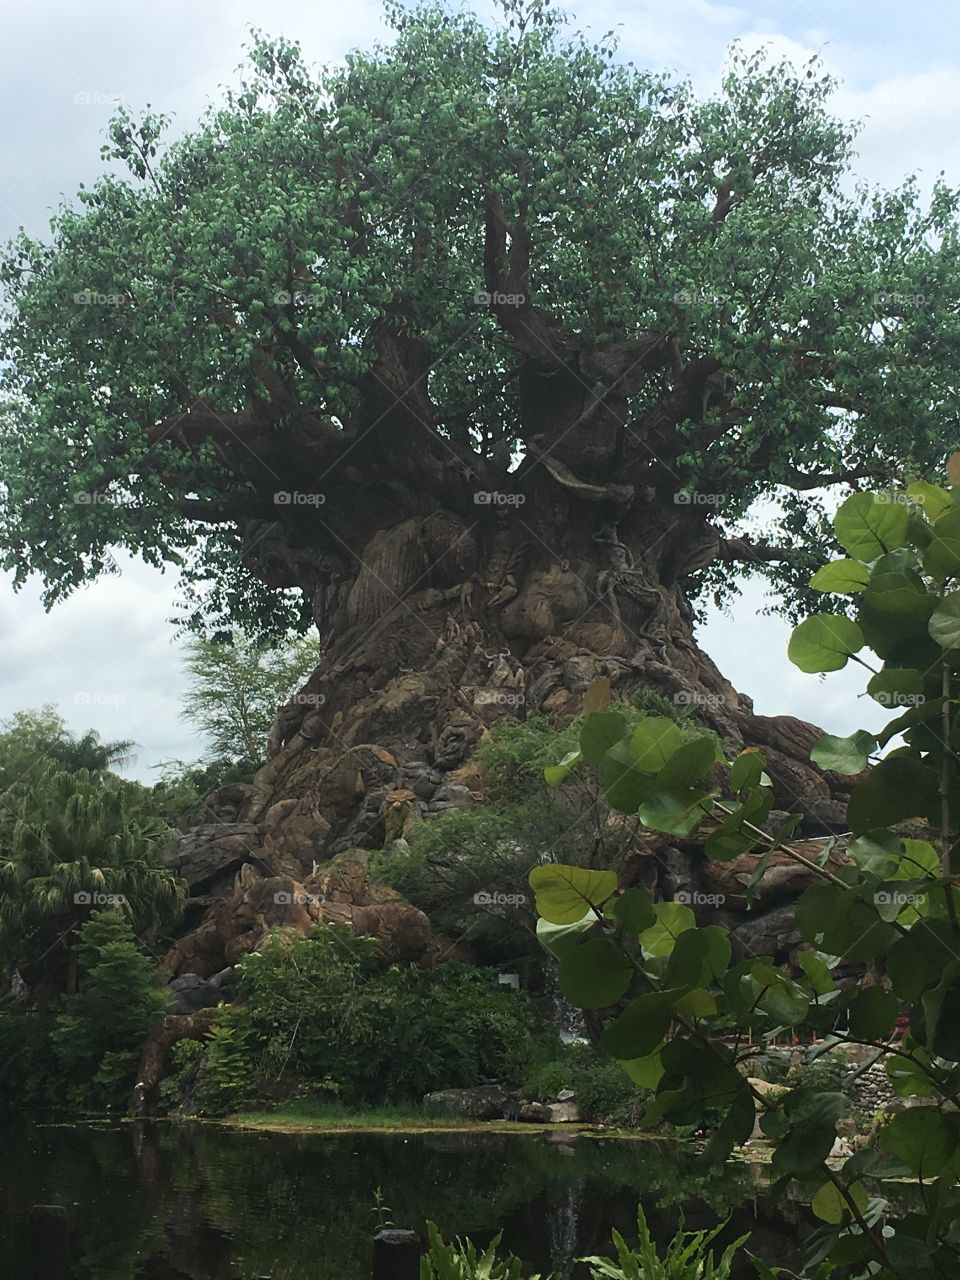 The tree of life is simply massive.